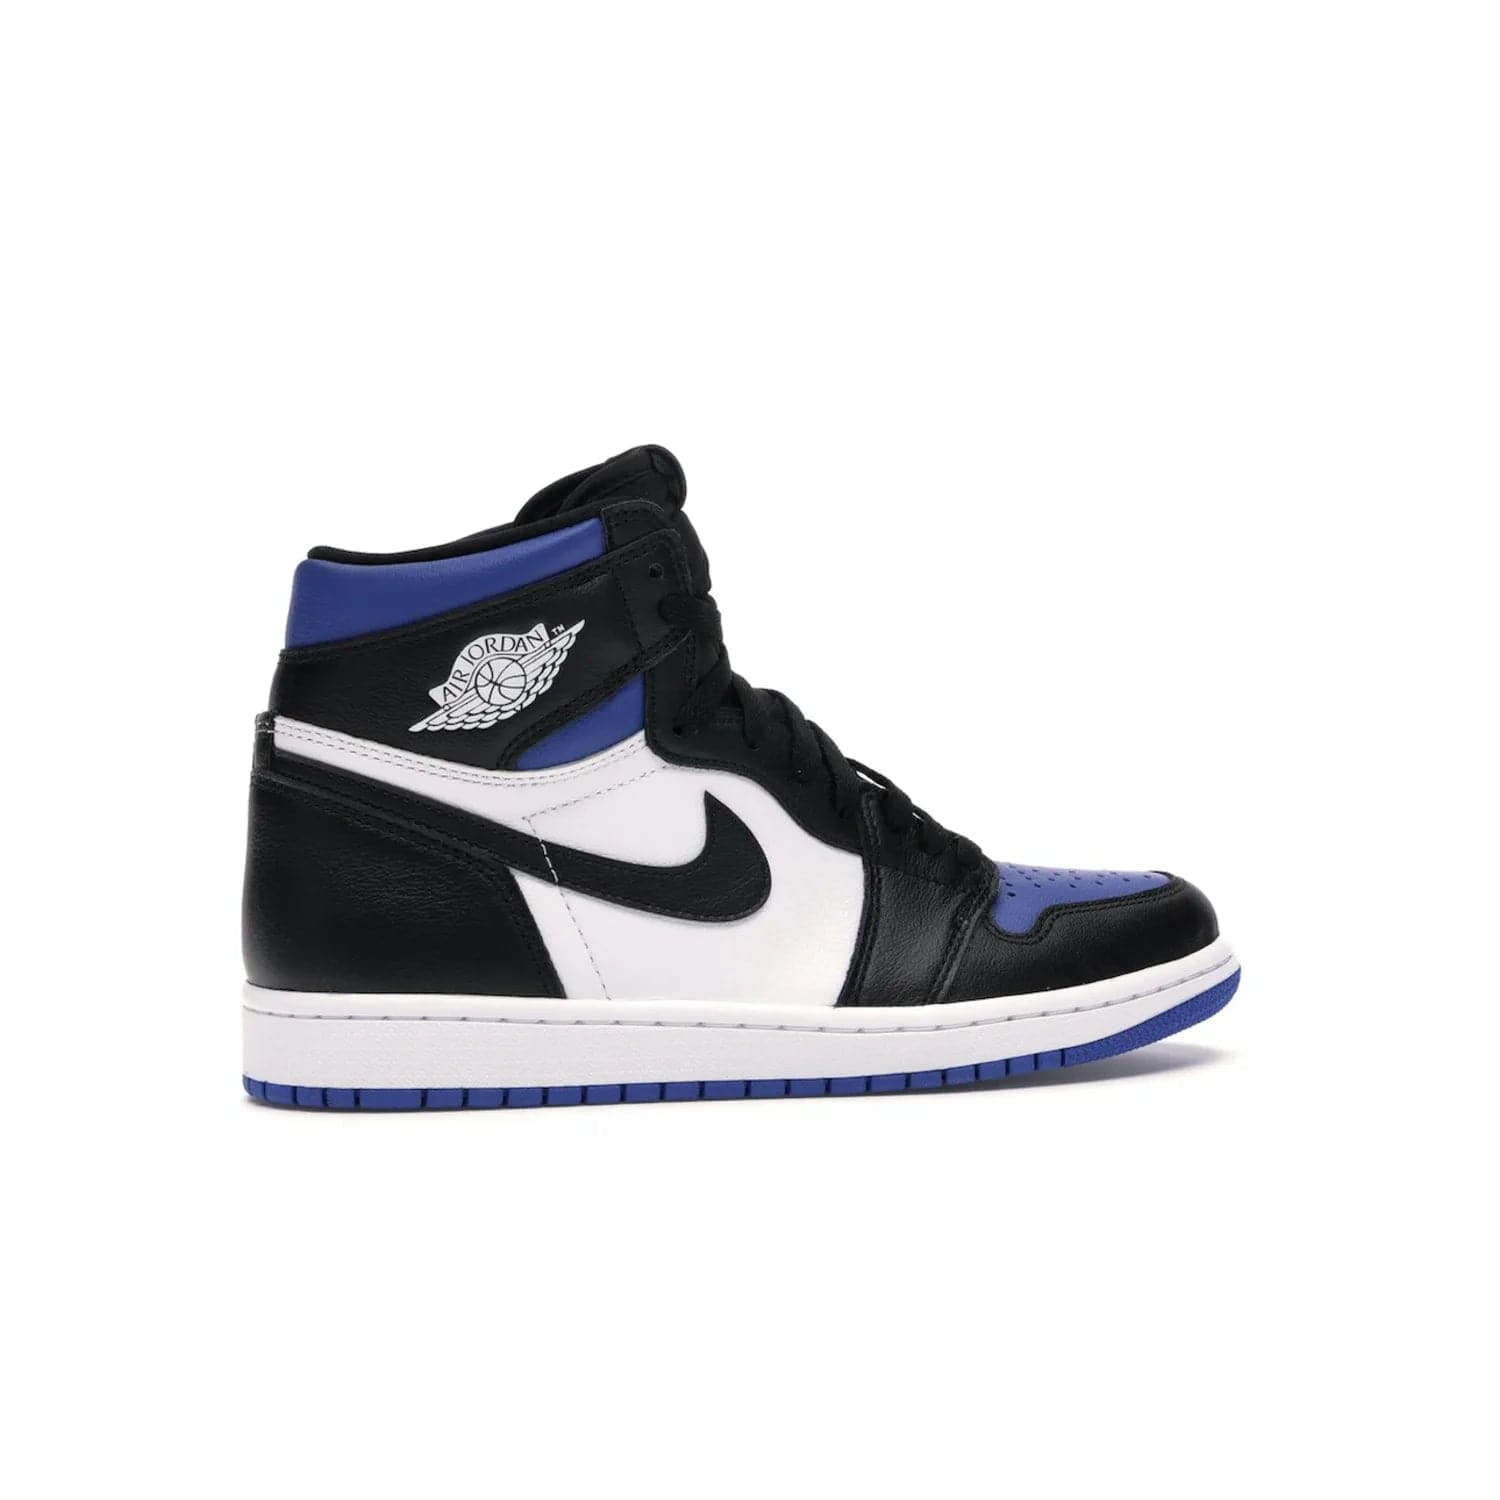 Jordan 1 Retro High Royal Toe - Image 35 - Only at www.BallersClubKickz.com - Refresh your look with the Jordan 1 Retro High Royal Toe. This classic AJ 1 sports a white and royal leather upper, black leather overlays, and branded leather tongue tag. Pick up today and set the streets ablaze.